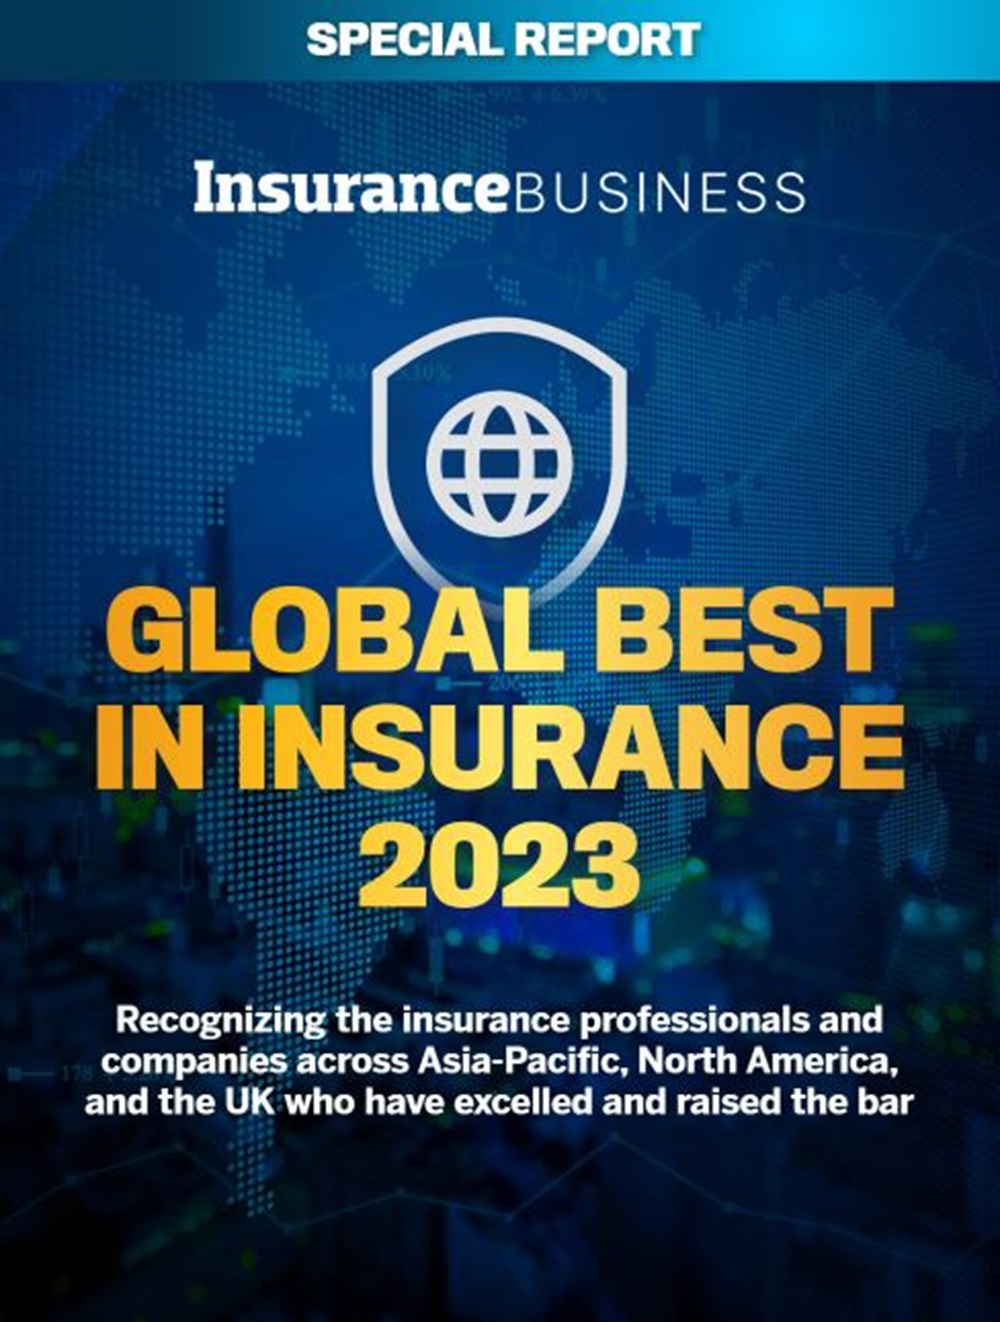 A screenshot of the cover page of Insurance Business's Special Report "Global Best in Insurance 2023".